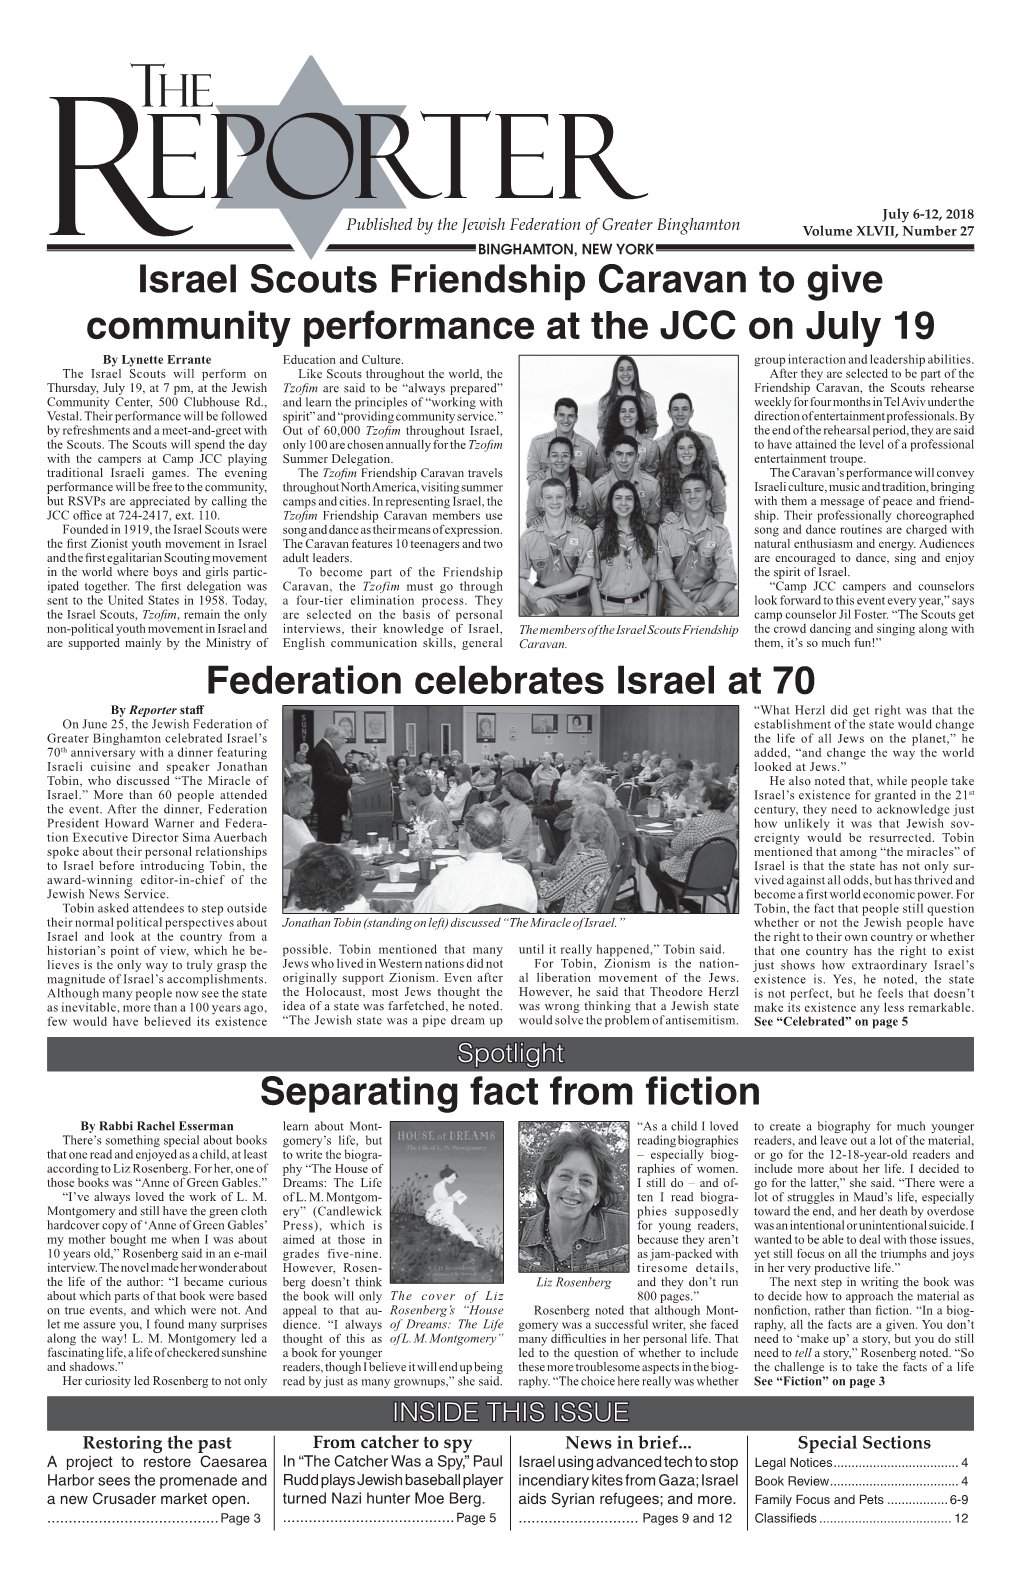 Israel Scouts Friendship Caravan to Give Community Performance at the JCC on July 19 by Lynette Errante Education and Culture